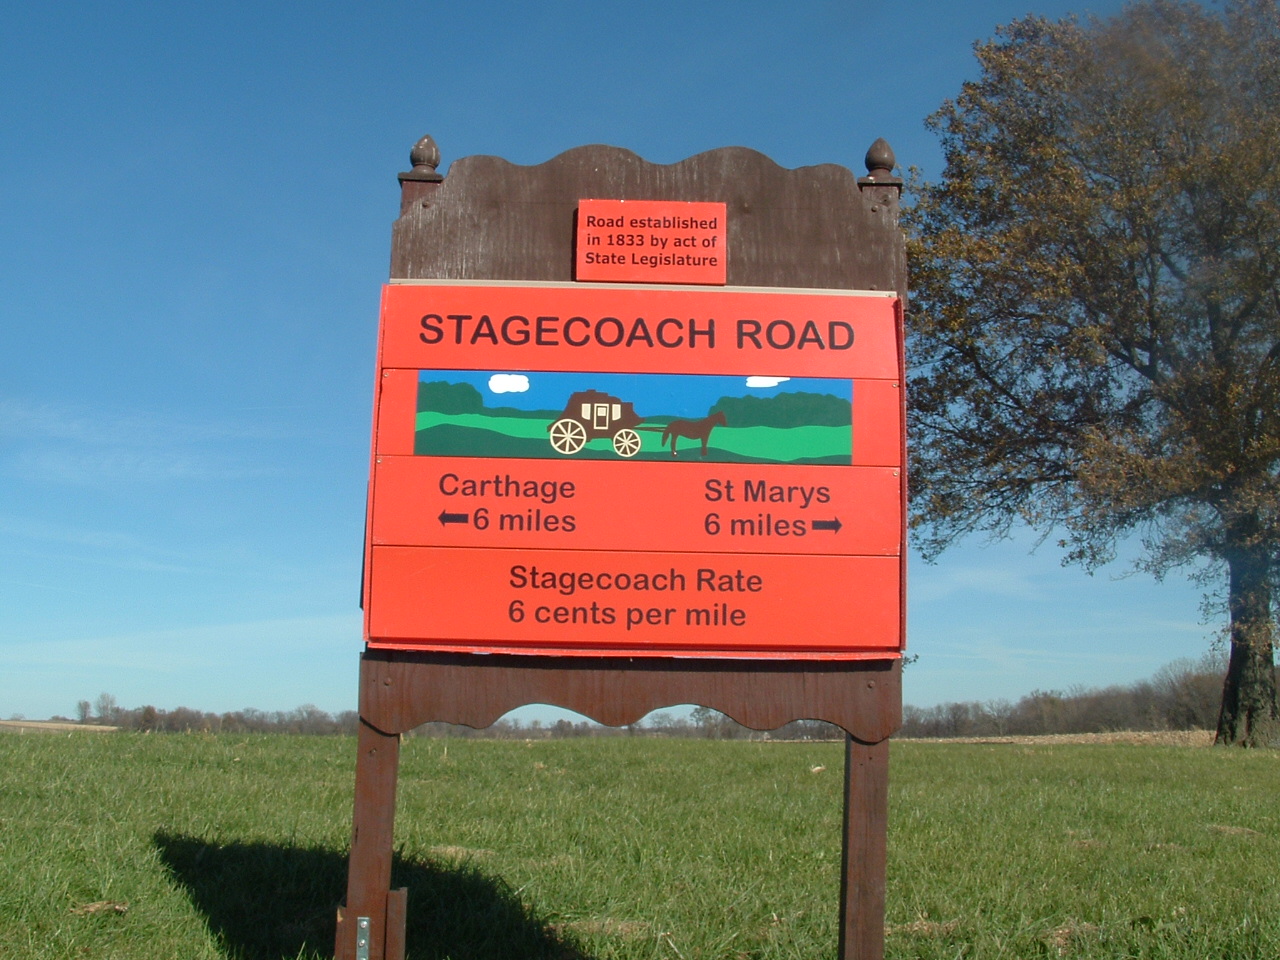 New sign installed in 2005, and repaired in 2010, marking the old stagecoach road which went past the Old Brick Church in pioneer days. The sign is located on land owned by the cemetery association.